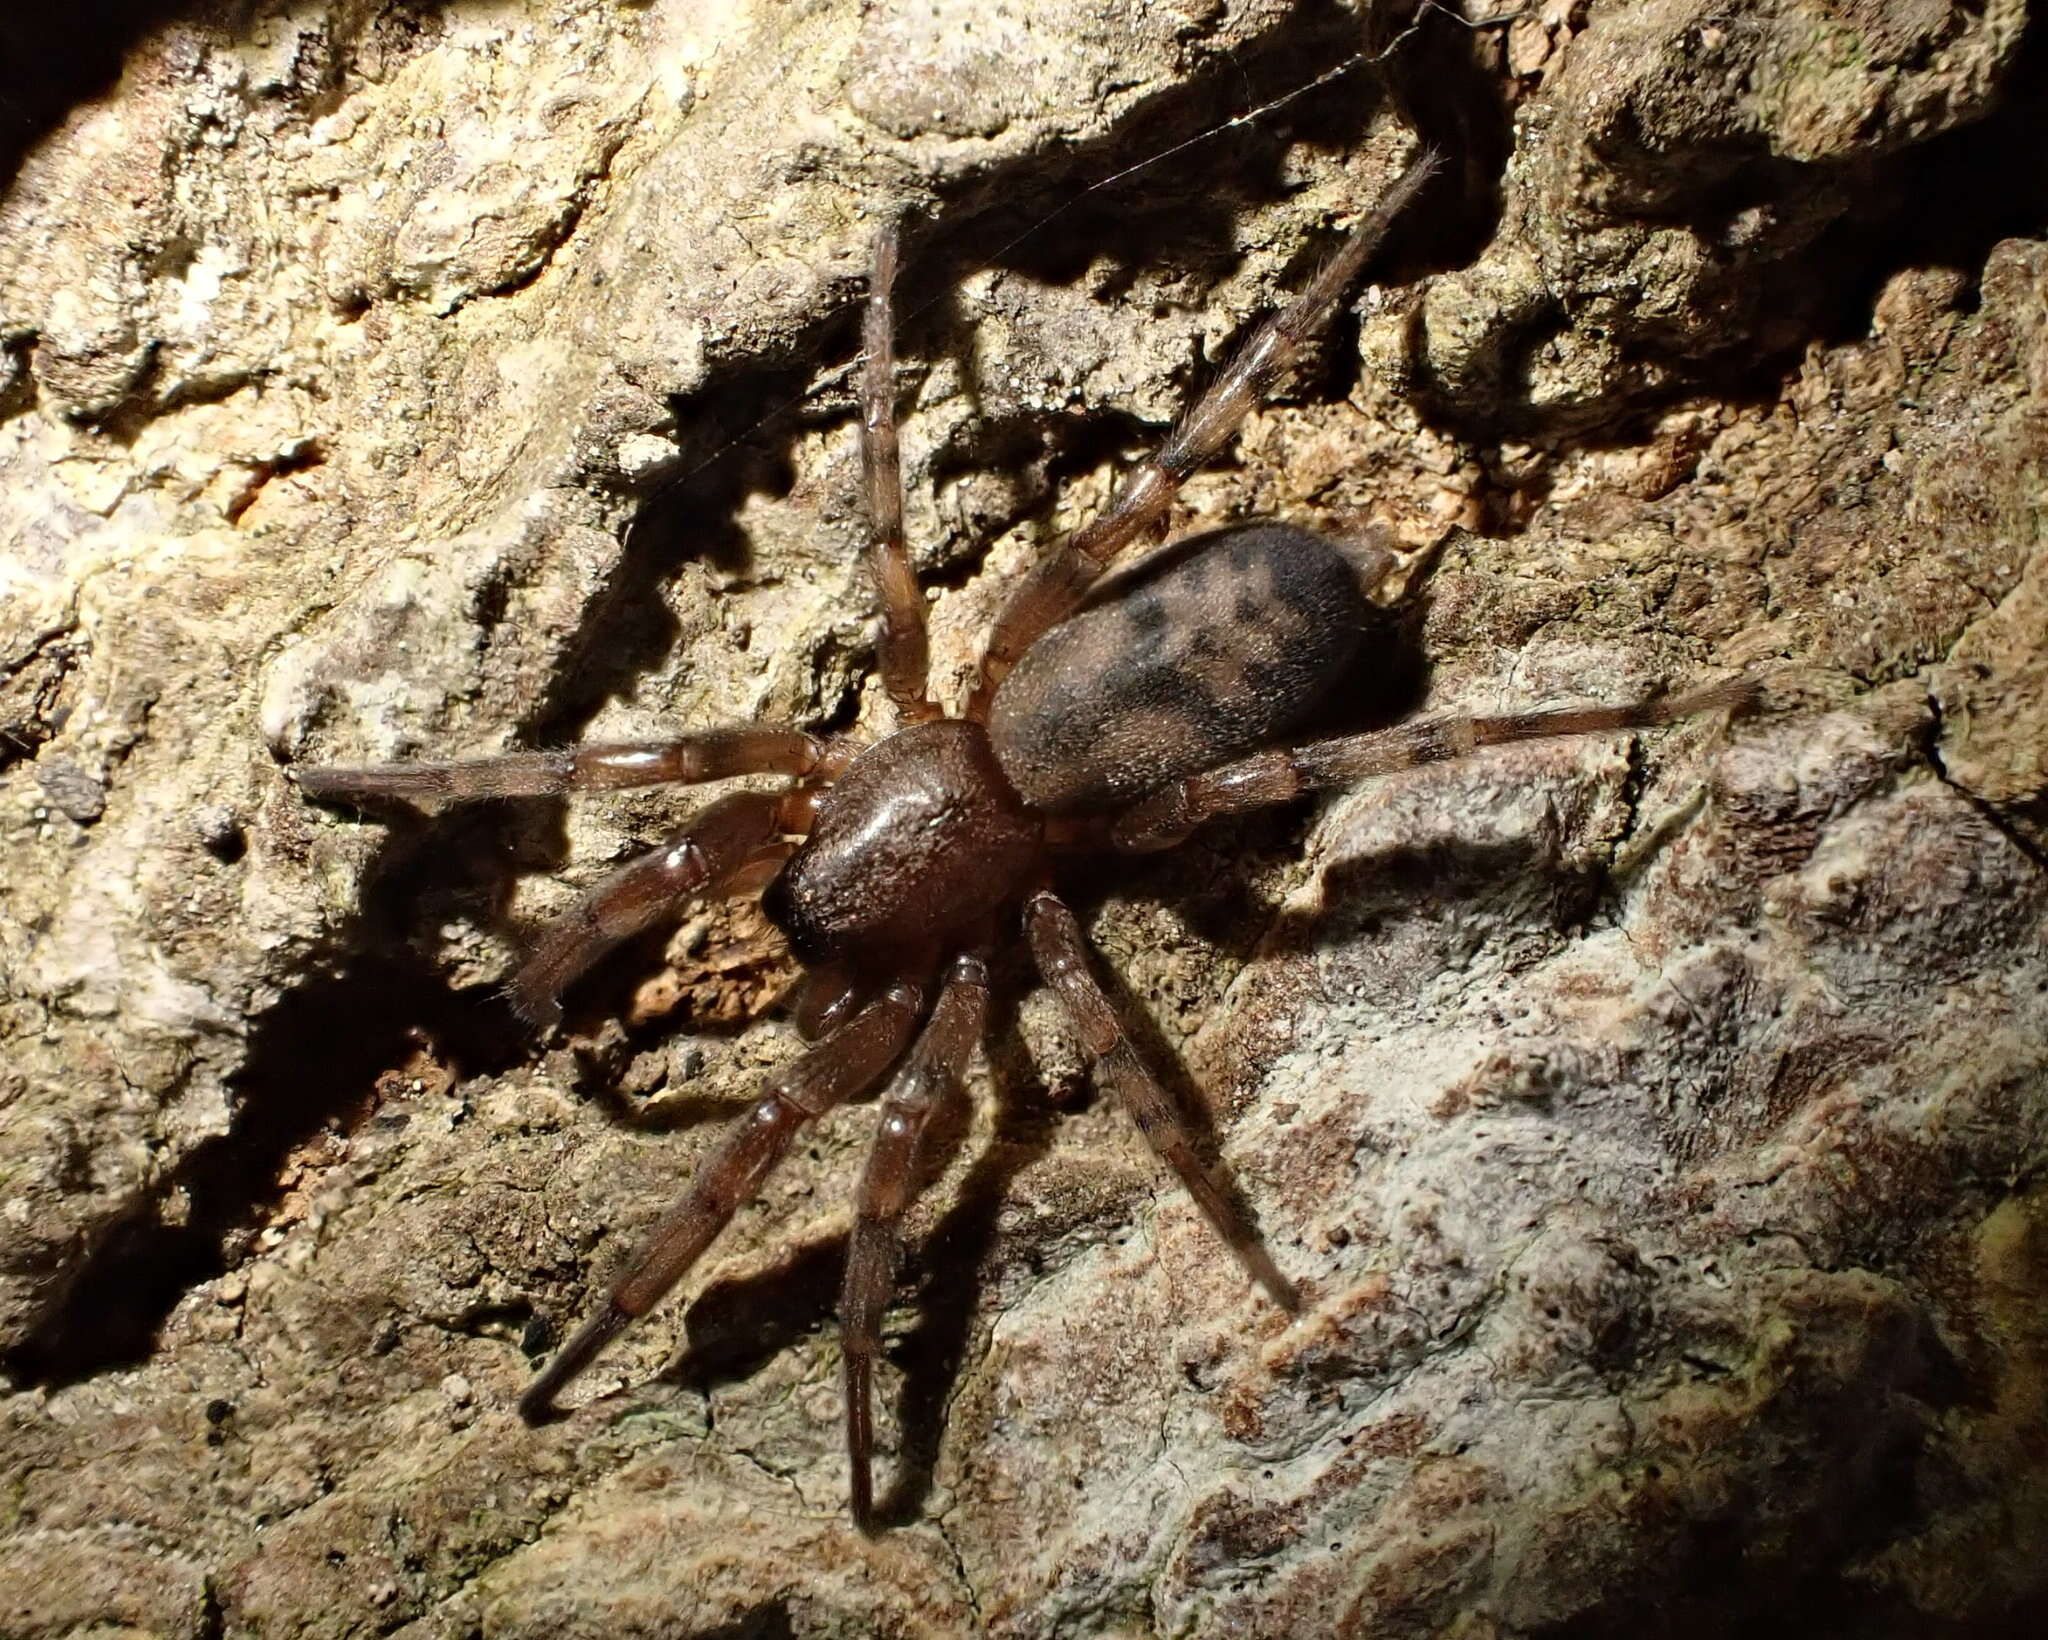 Image of ground spiders